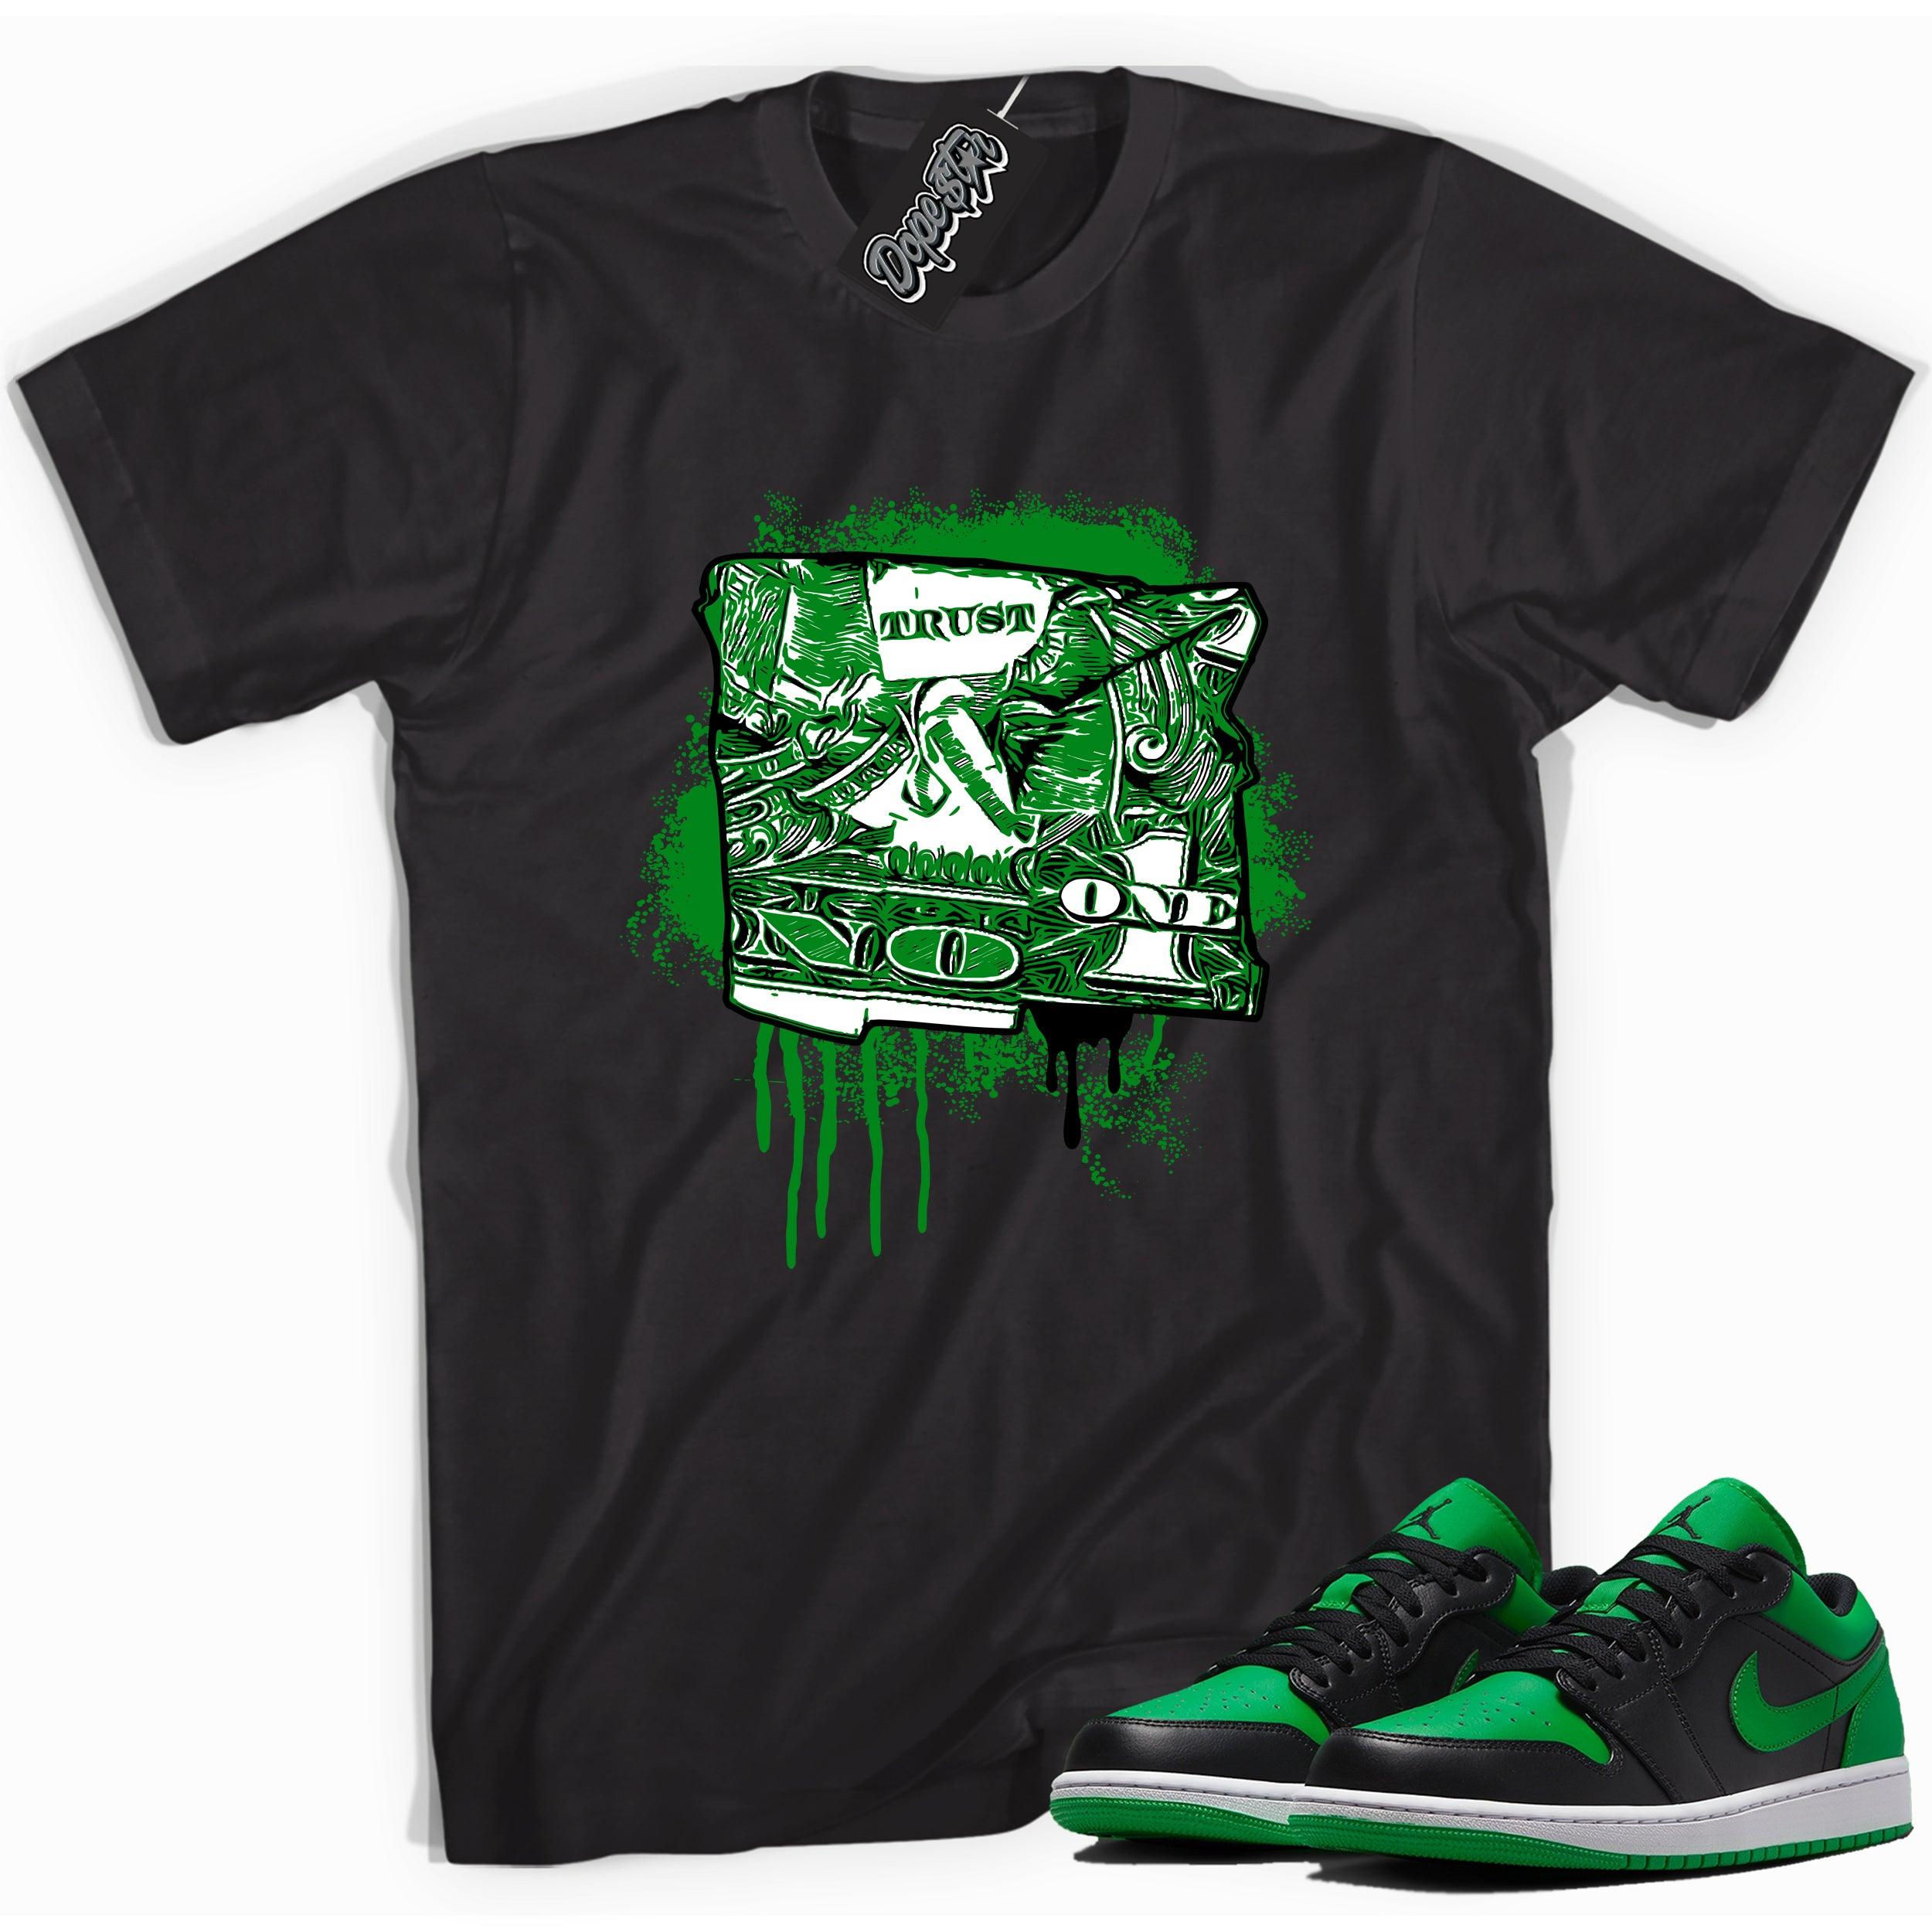 Cool black graphic tee with 'trust no one dollar' print, that perfectly matches Air Jordan 1 Low Lucky Green sneakers